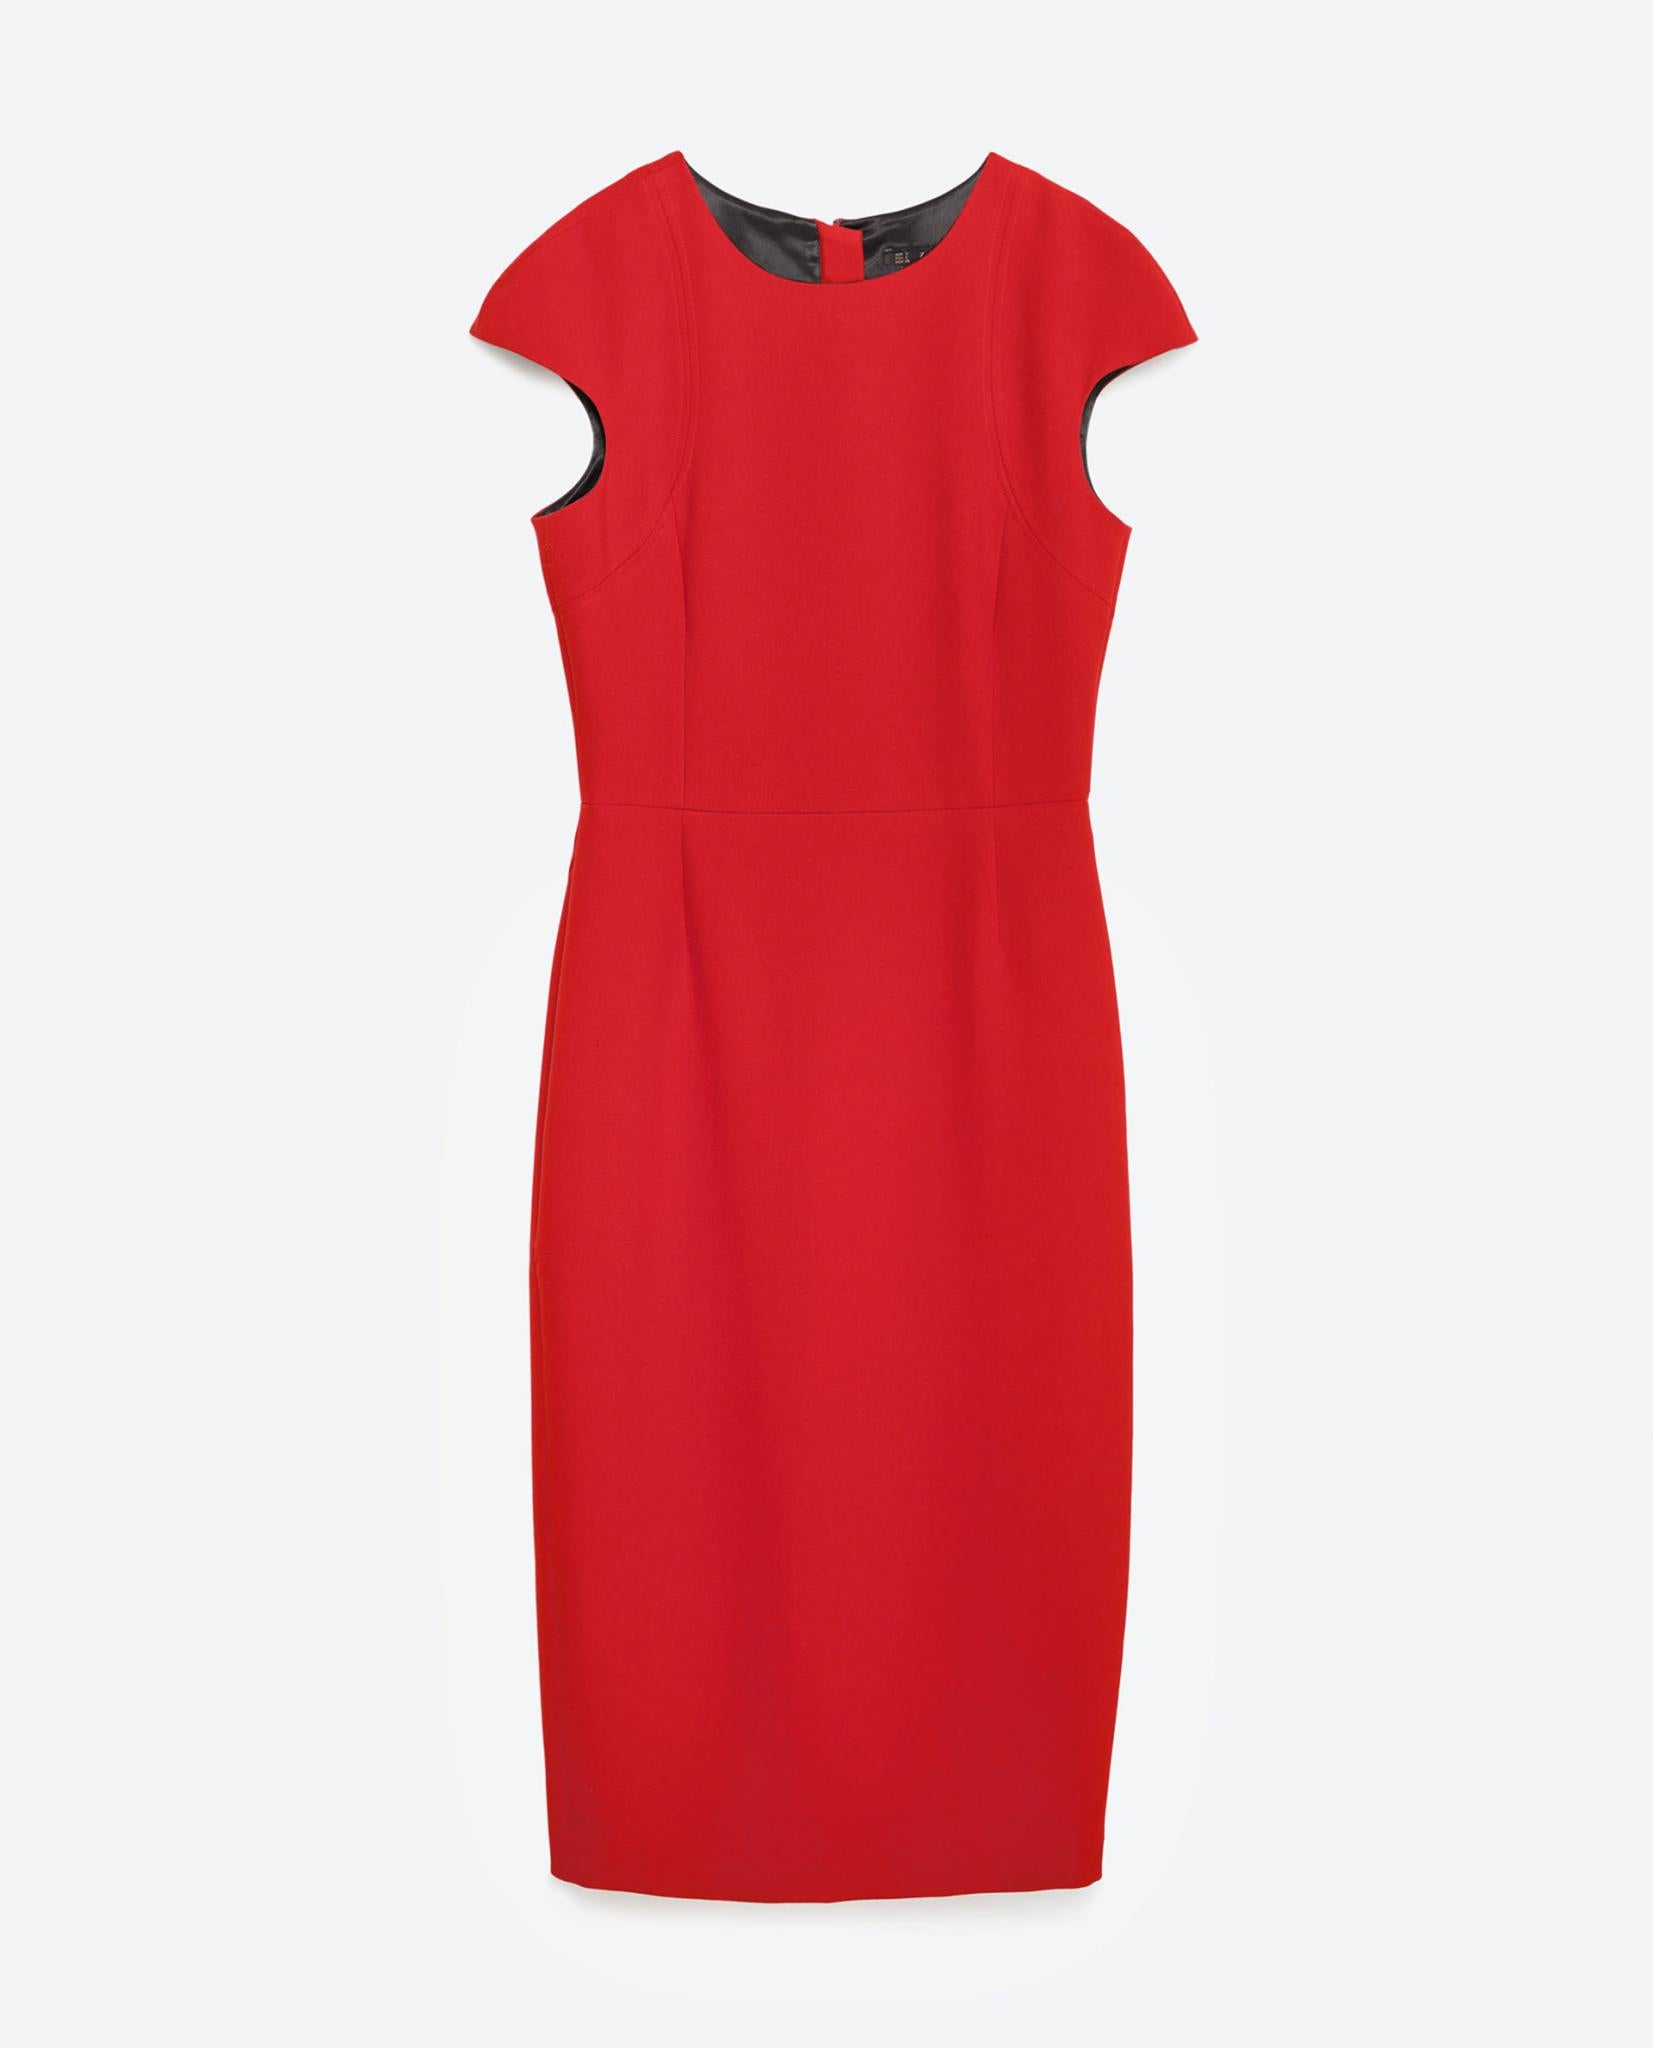 Lady in Red: 15 Finds That Will Make Your Valentine's Day Pop!
